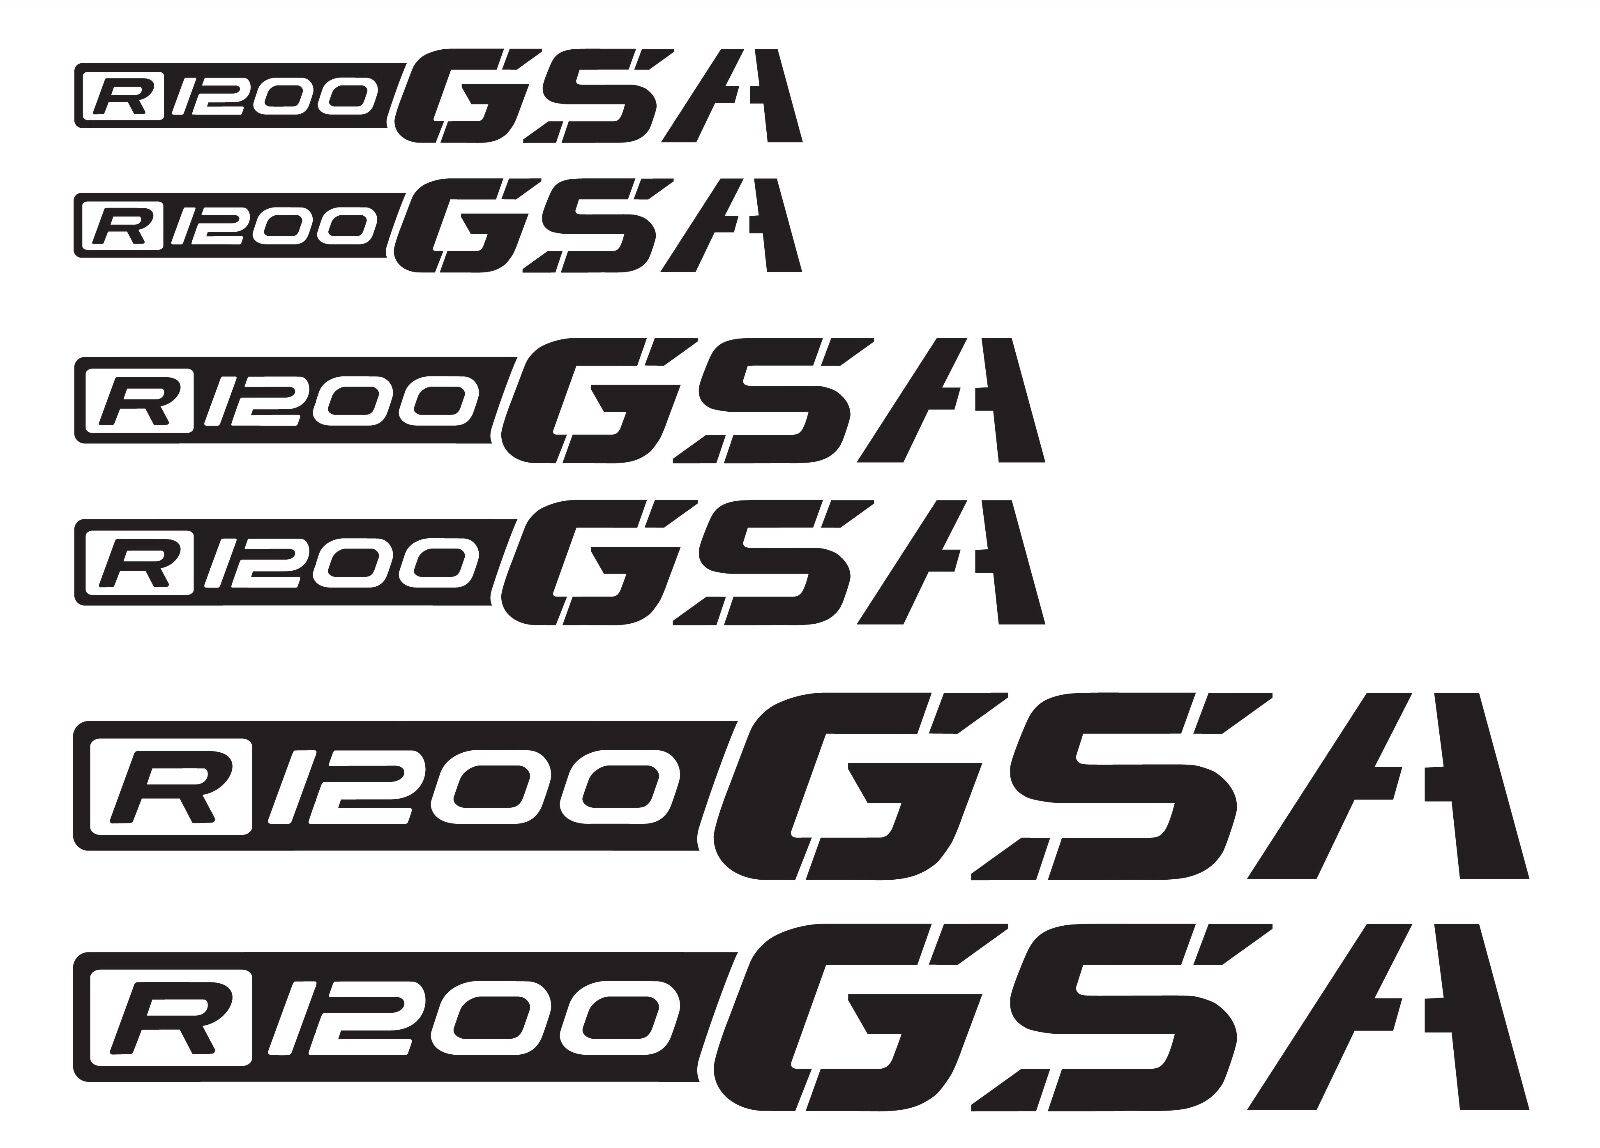 R1200 GS Reflective Decal Kit for BMW Motorcycles